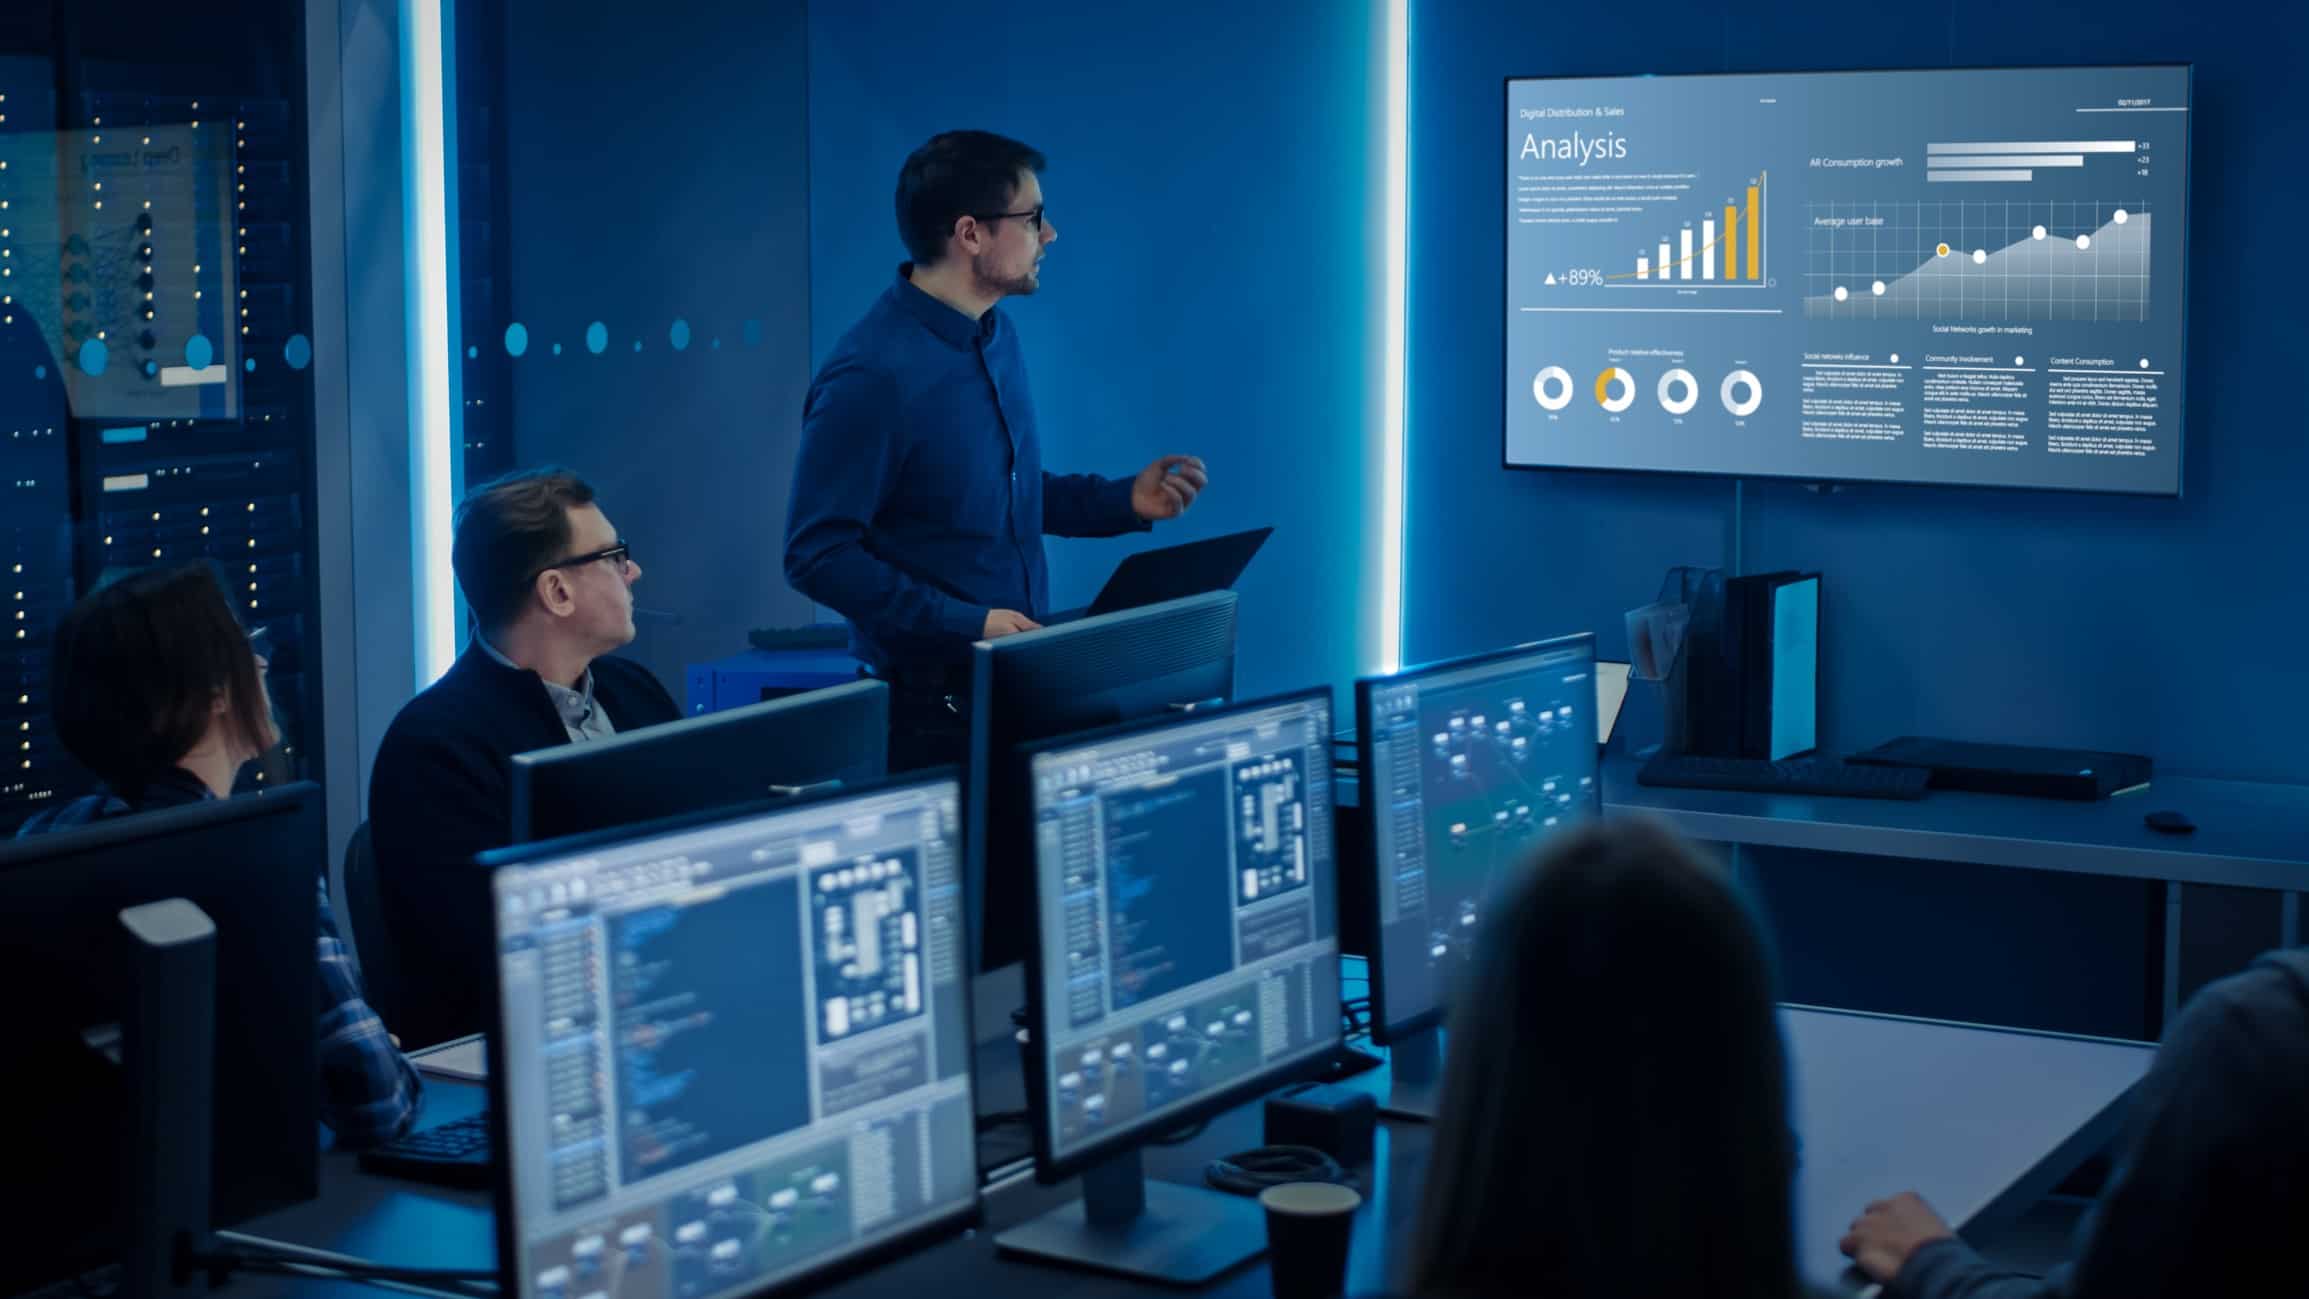 A group of executives sit in front of computer screens in a darkened room while a colleague stands giving a presentation with a share price graphic lit up on the wall